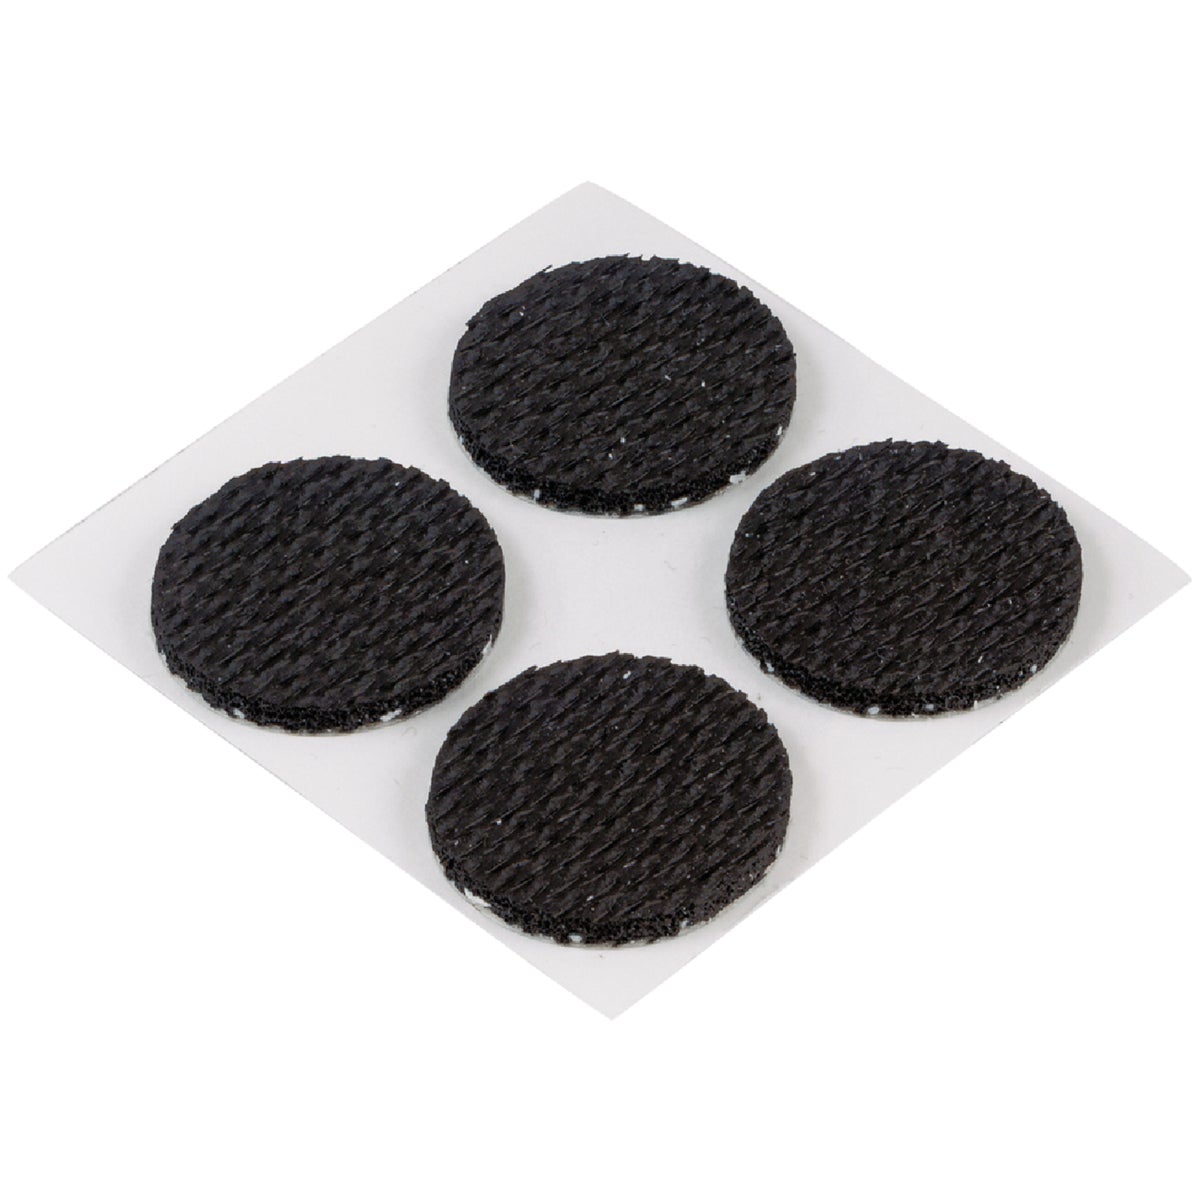 Item 230235, Foam pads protect furniture and counter surfaces from scratches and marring